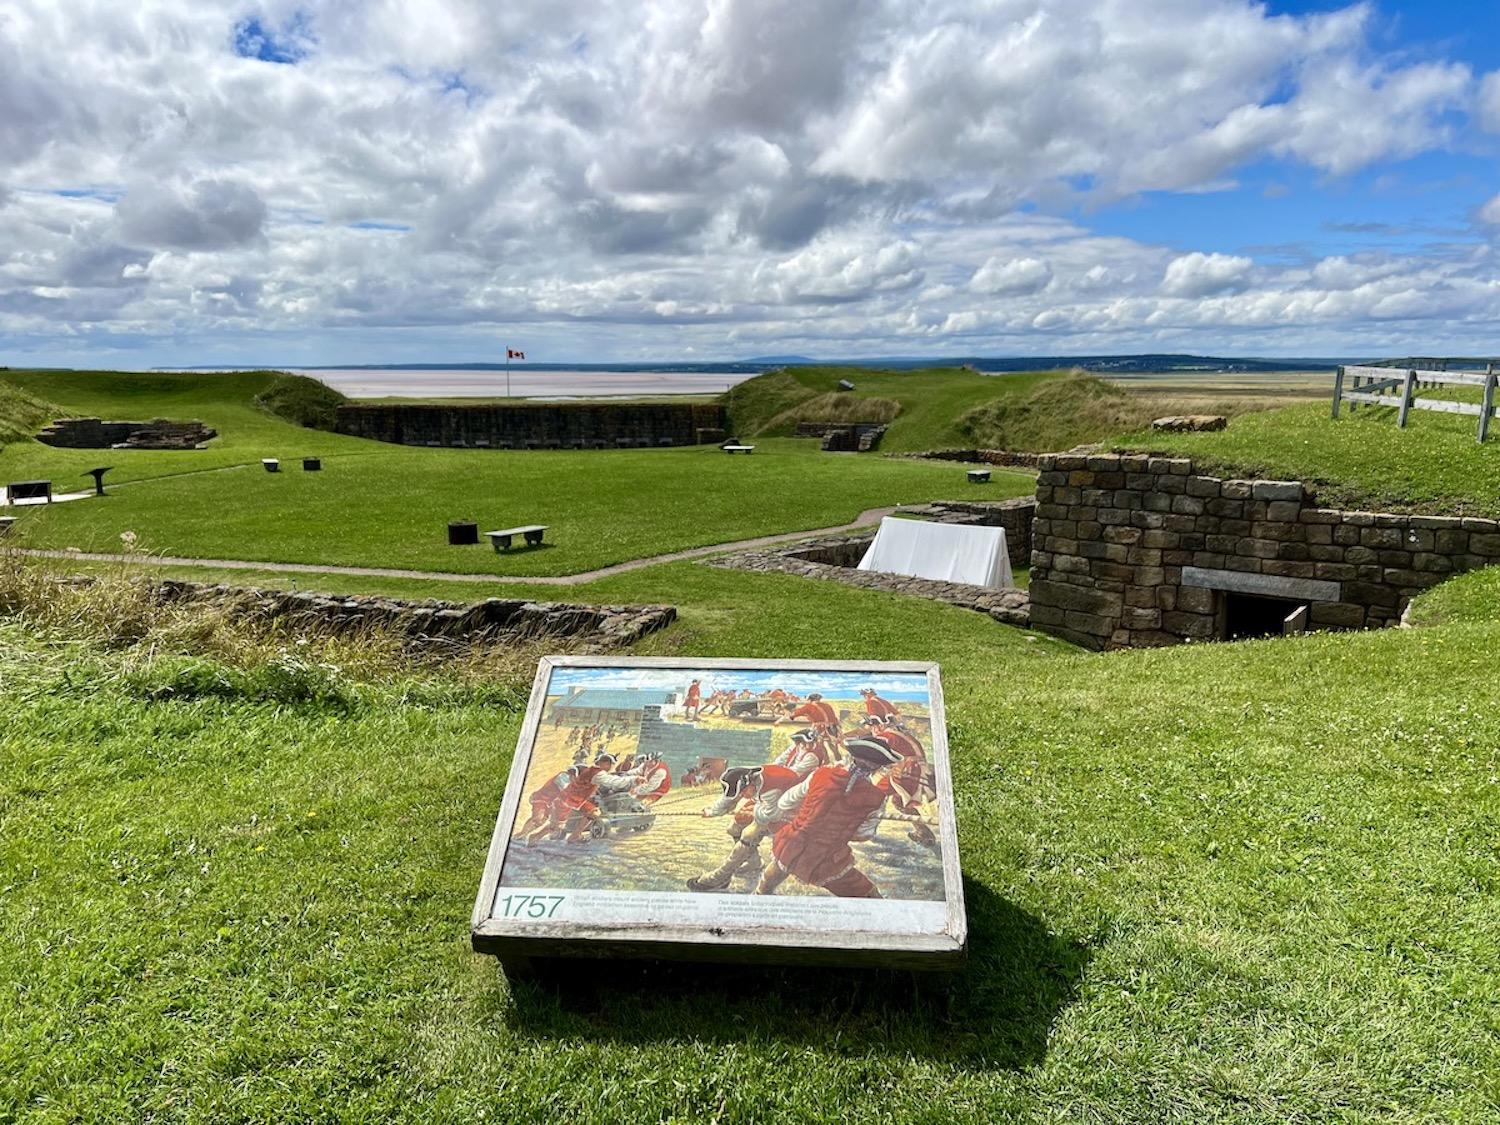 Interpretive panels help you imagine what life was like when this was an active fort.